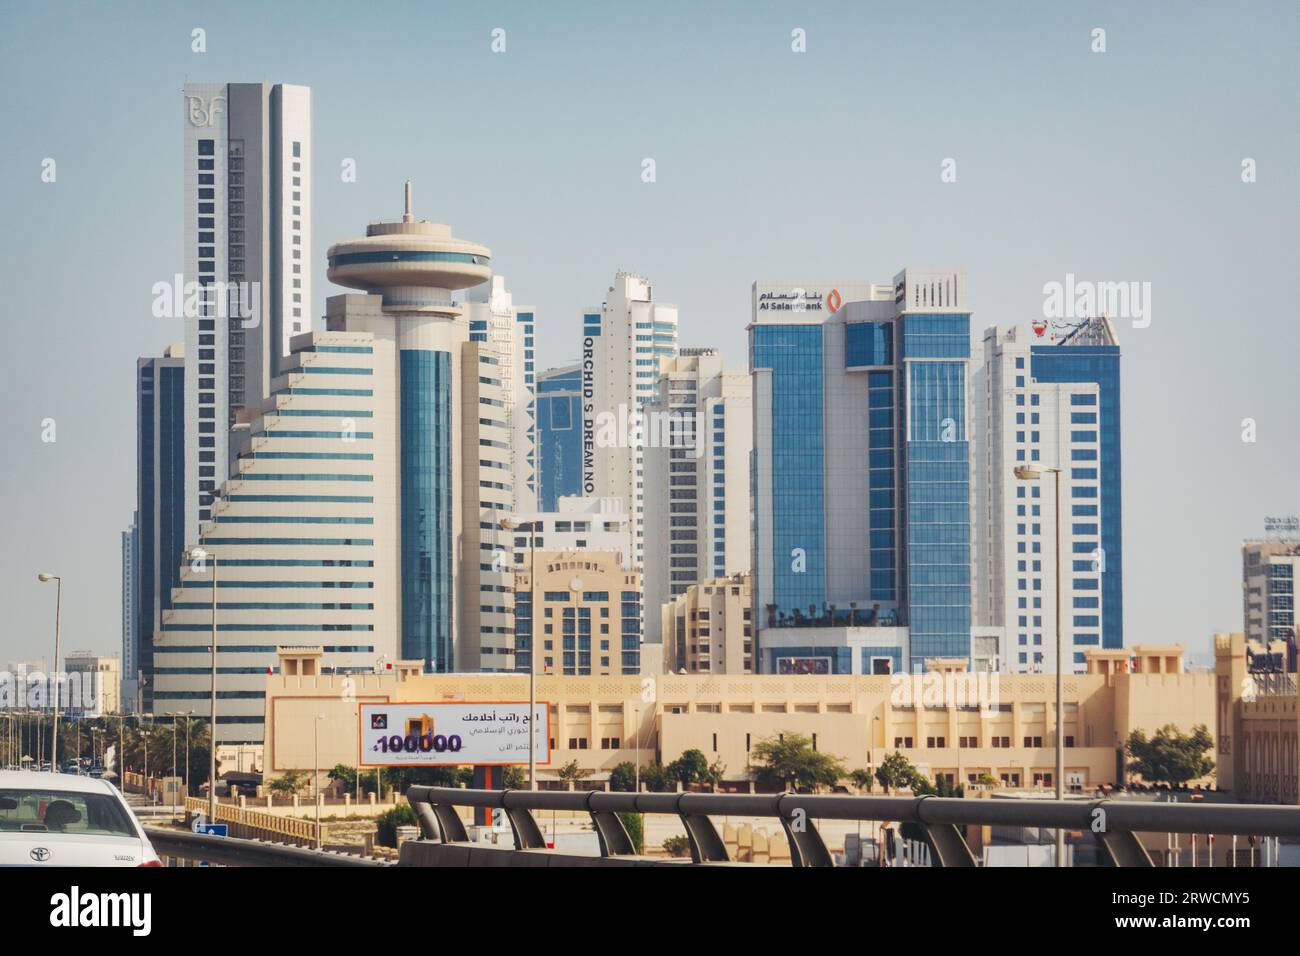 a cluster of skyscrapers in the financial district of Manama, Bahrain Stock Photo